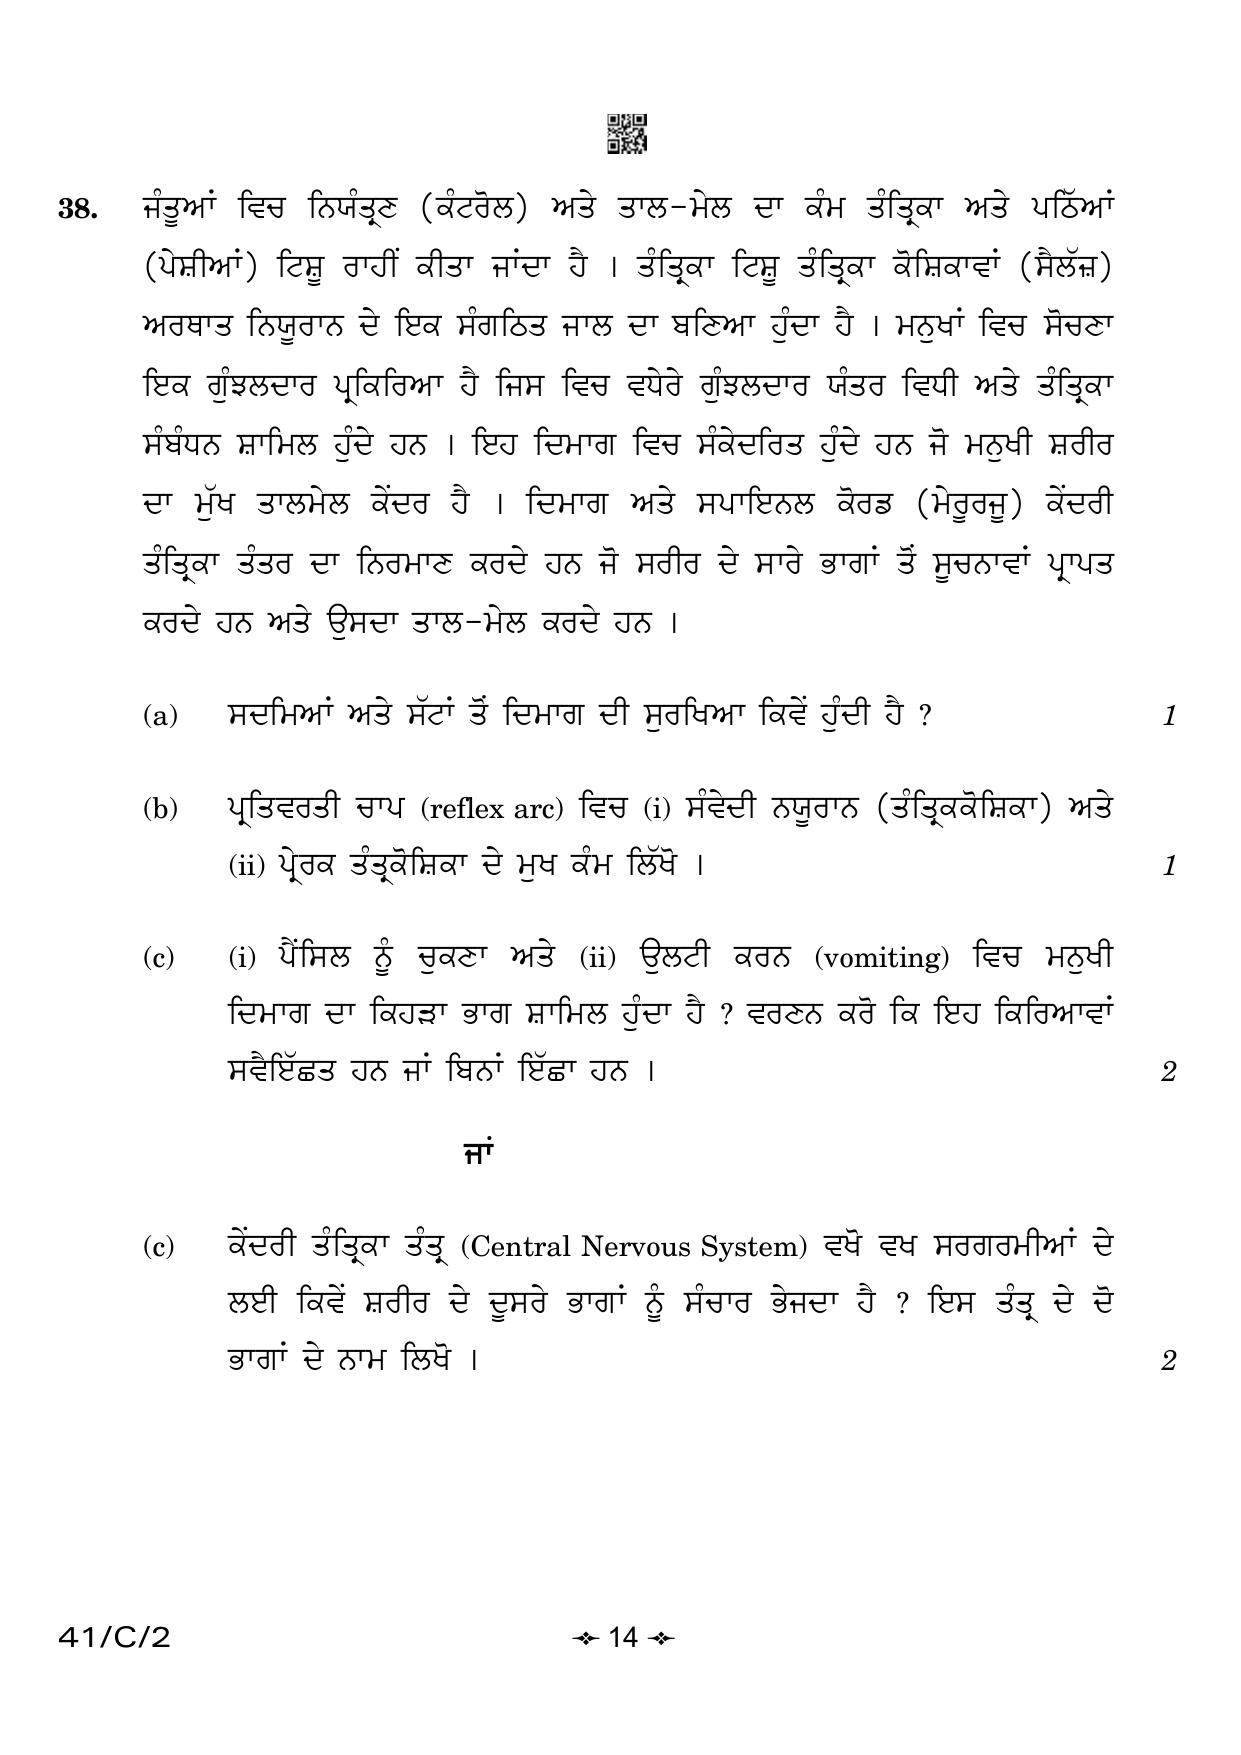 CBSE Class 10 41-2 Science Punjabi 2023 (Compartment) Question Paper - Page 14